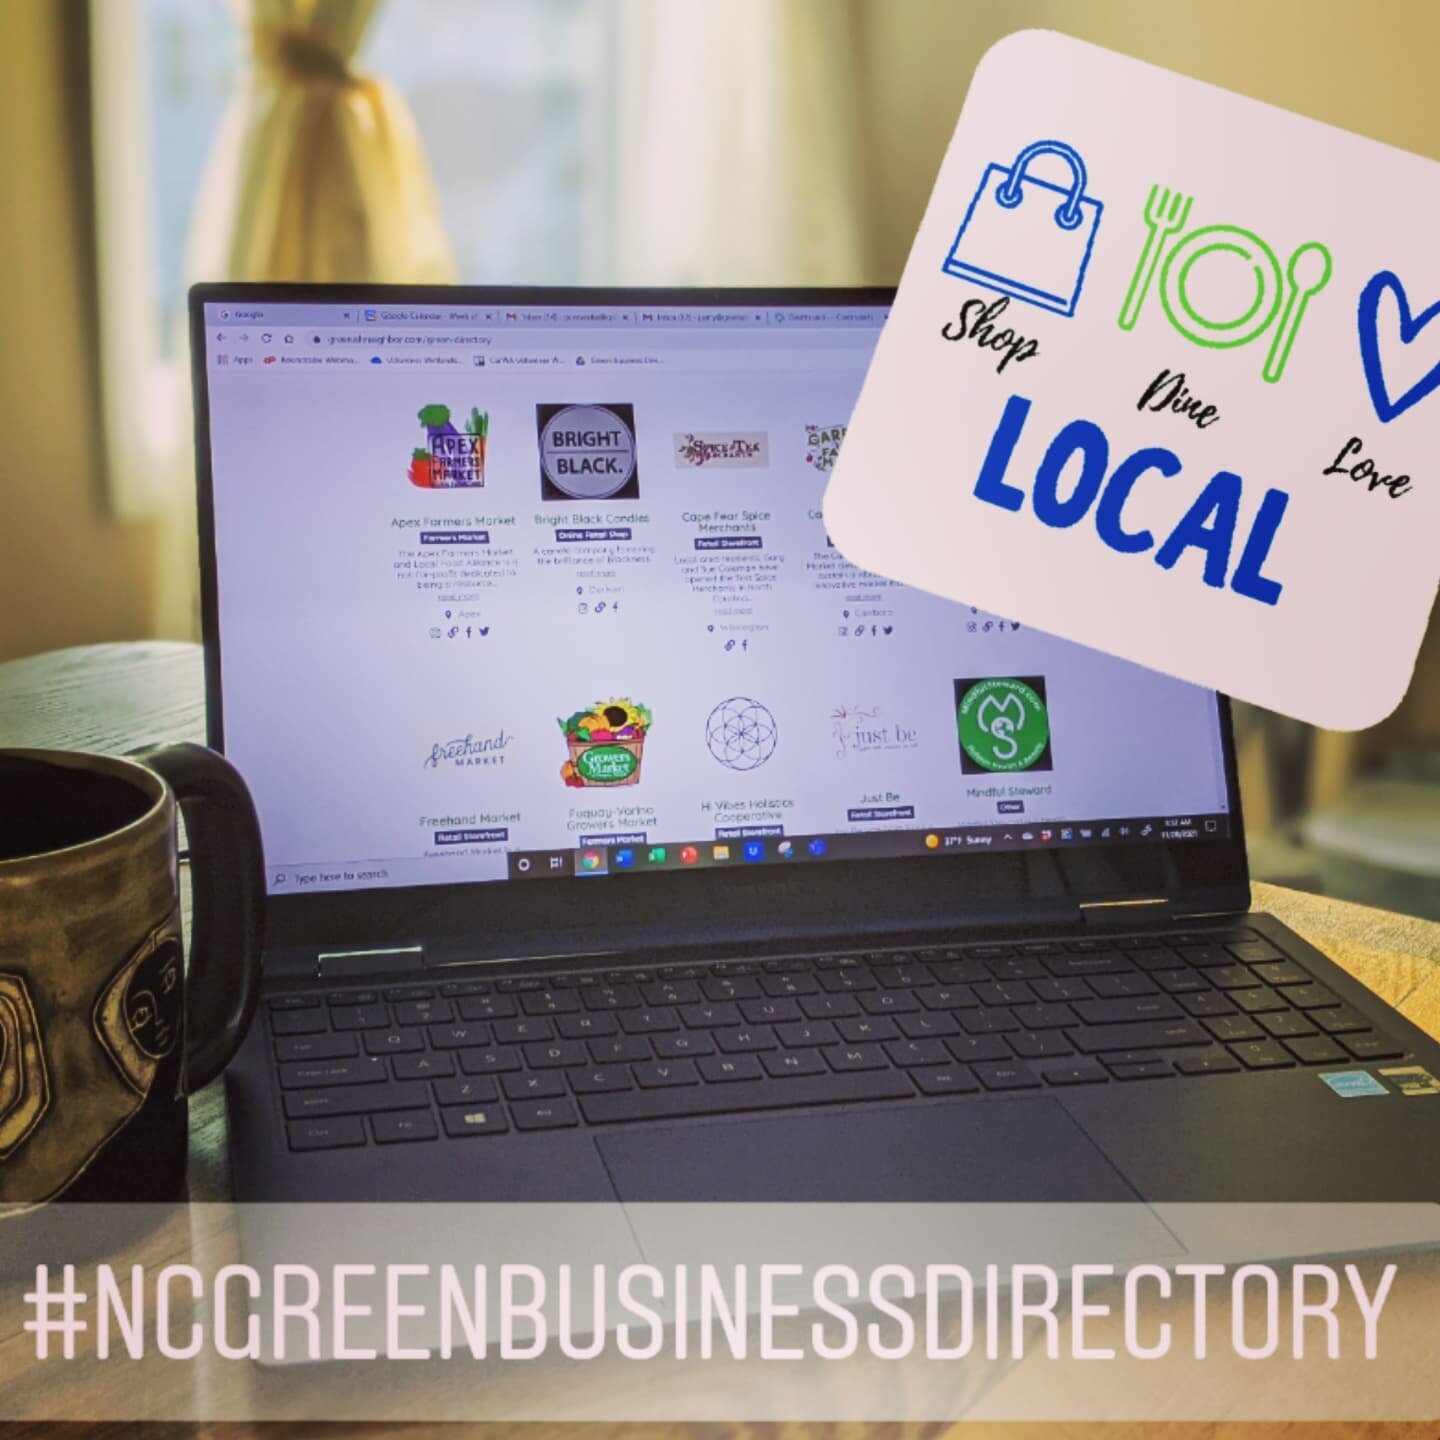 ☝️ Find the link to the NC GREEN BUSINESS DIRECTORY in the tap.bio above ☝️ to find local businesses to support this holiday season. 😁

We have 290 businesses to check out! And more are added all the time. 

Can we get to
3️⃣0️⃣0️⃣
by Jan 1 2022???
